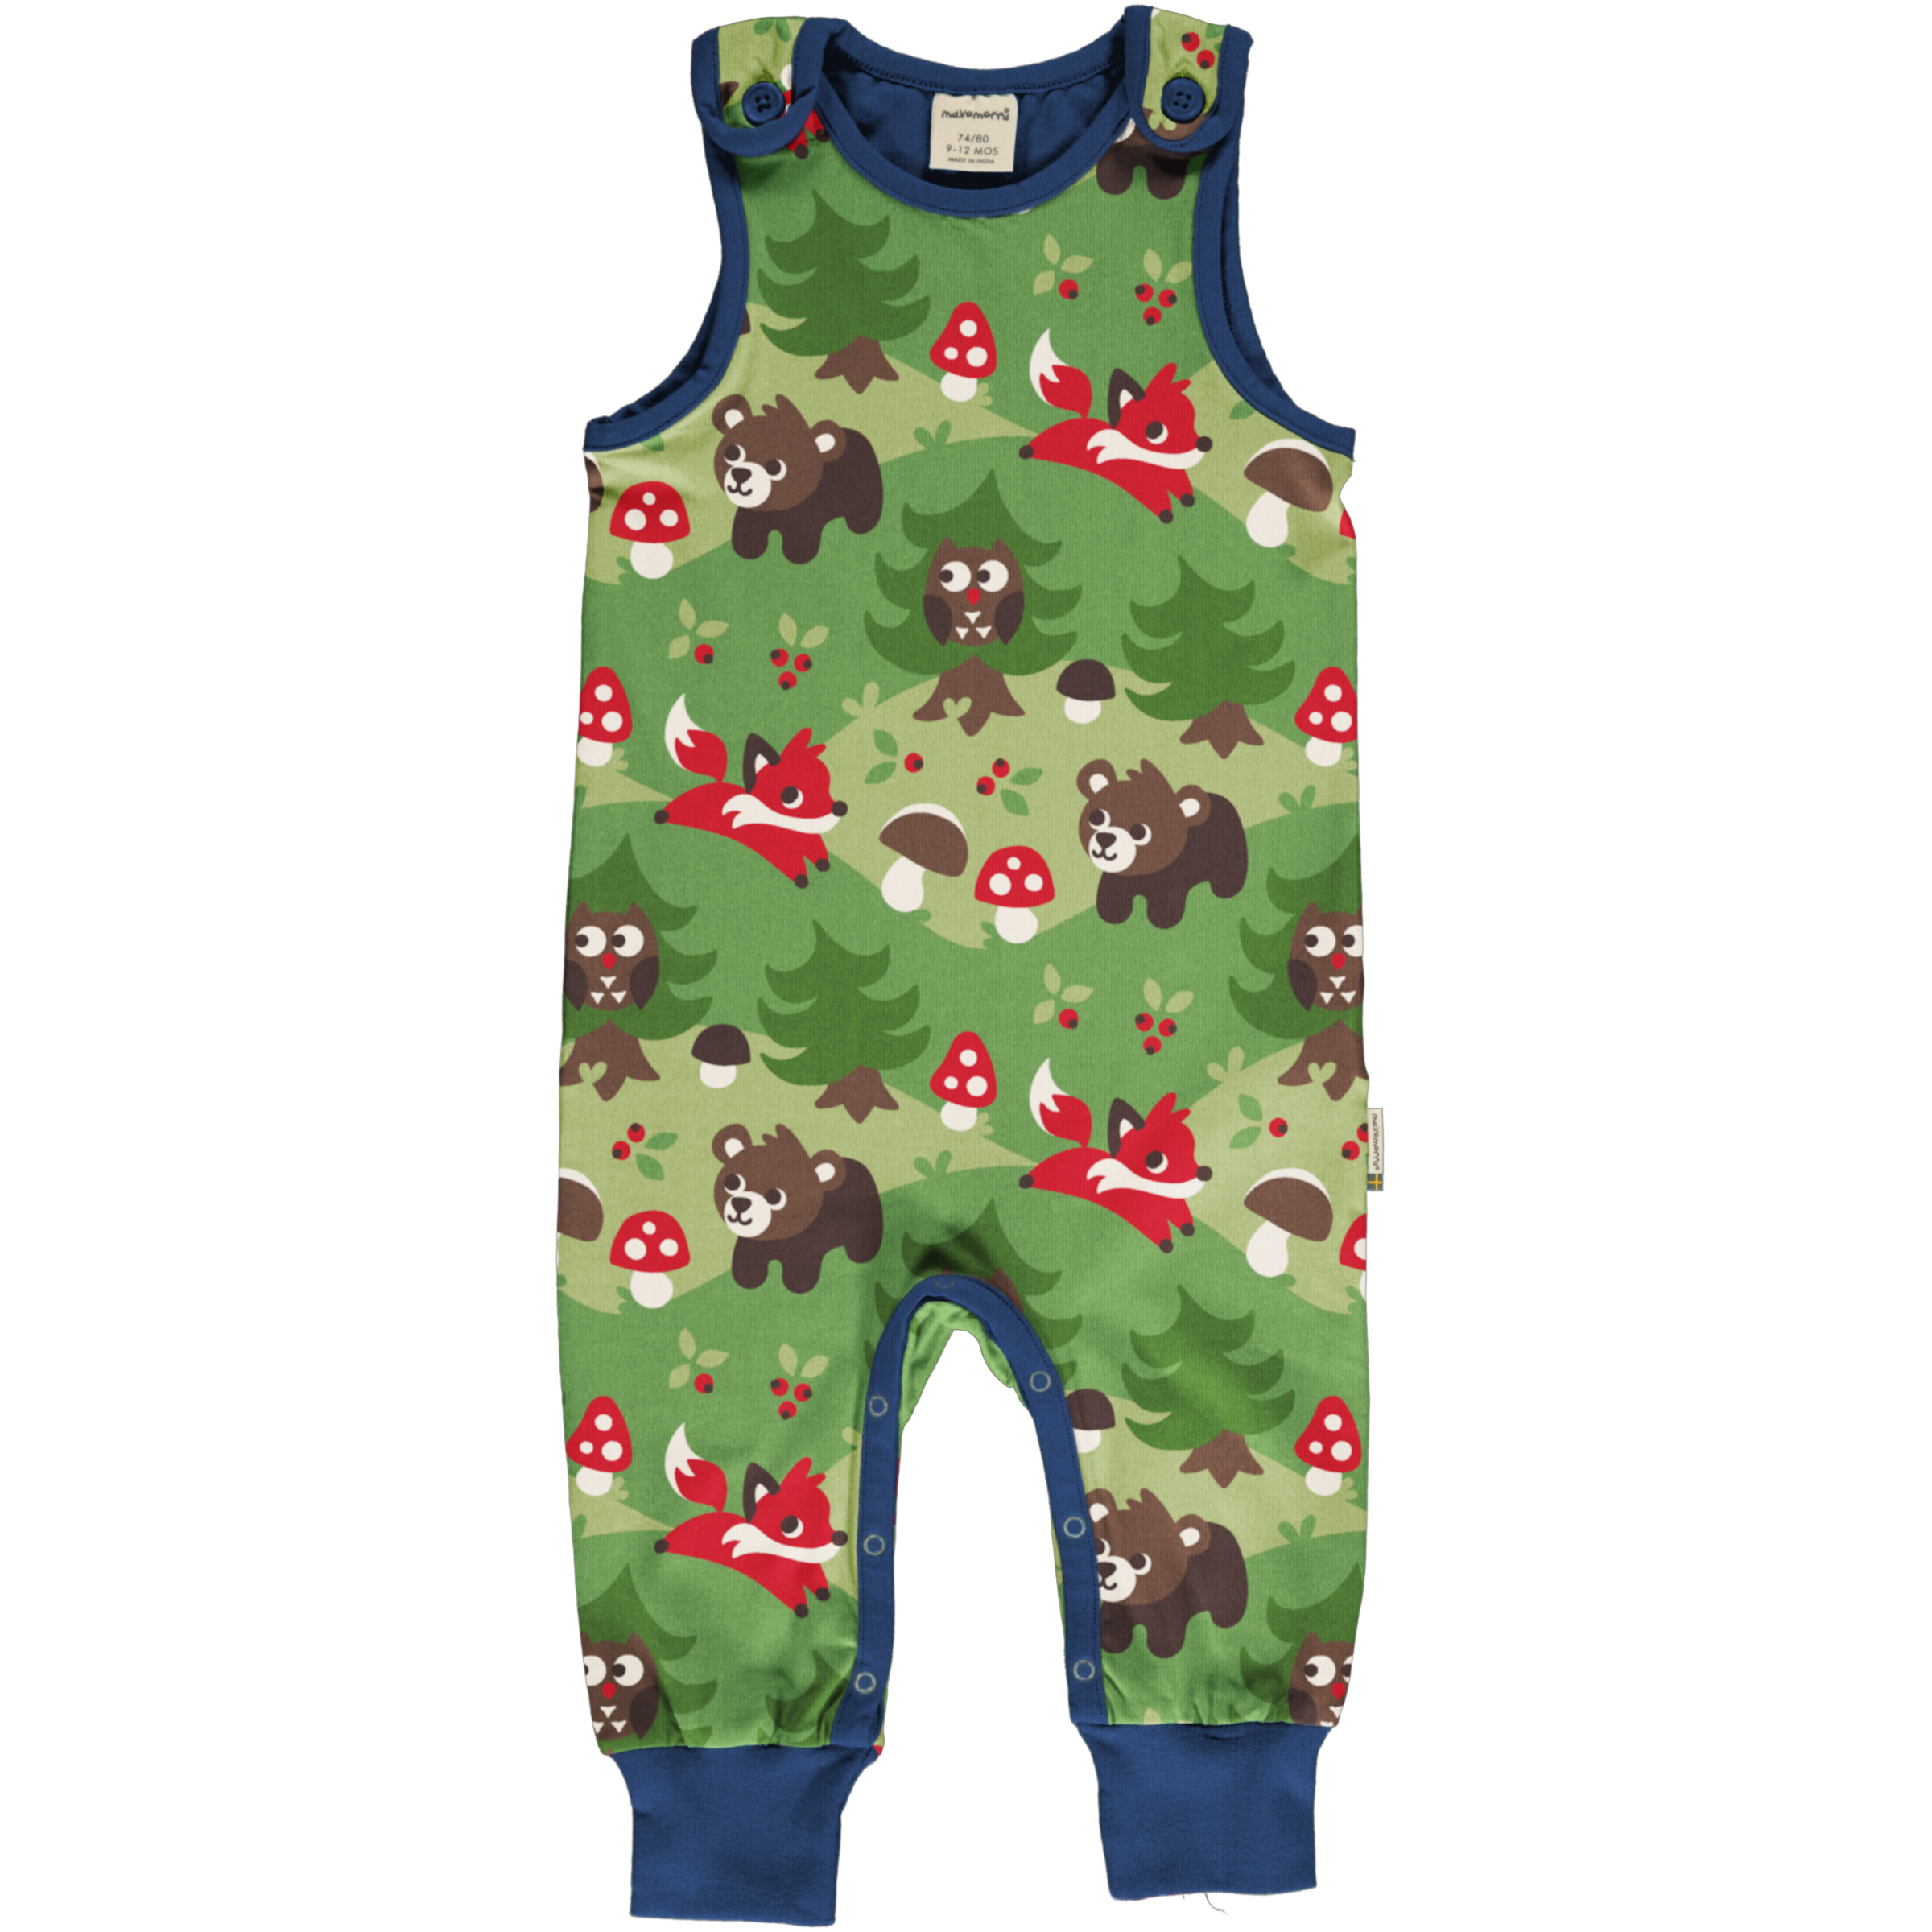 Maxomorra Baby Playsuit FOREST 050/056